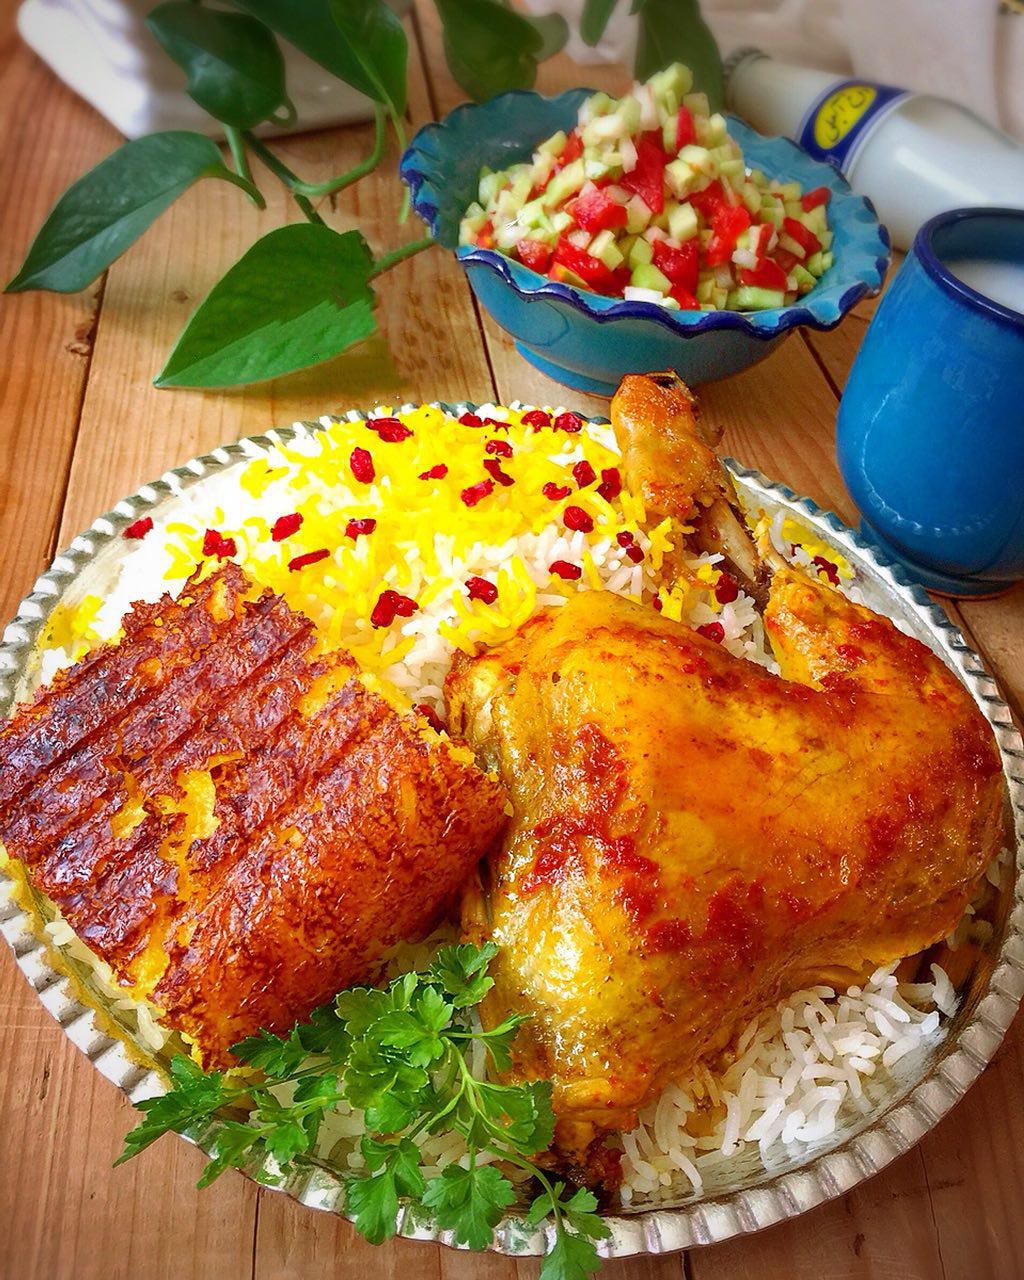 Best Persian Food and Drink with Ingredients & Price - Legendaryiran